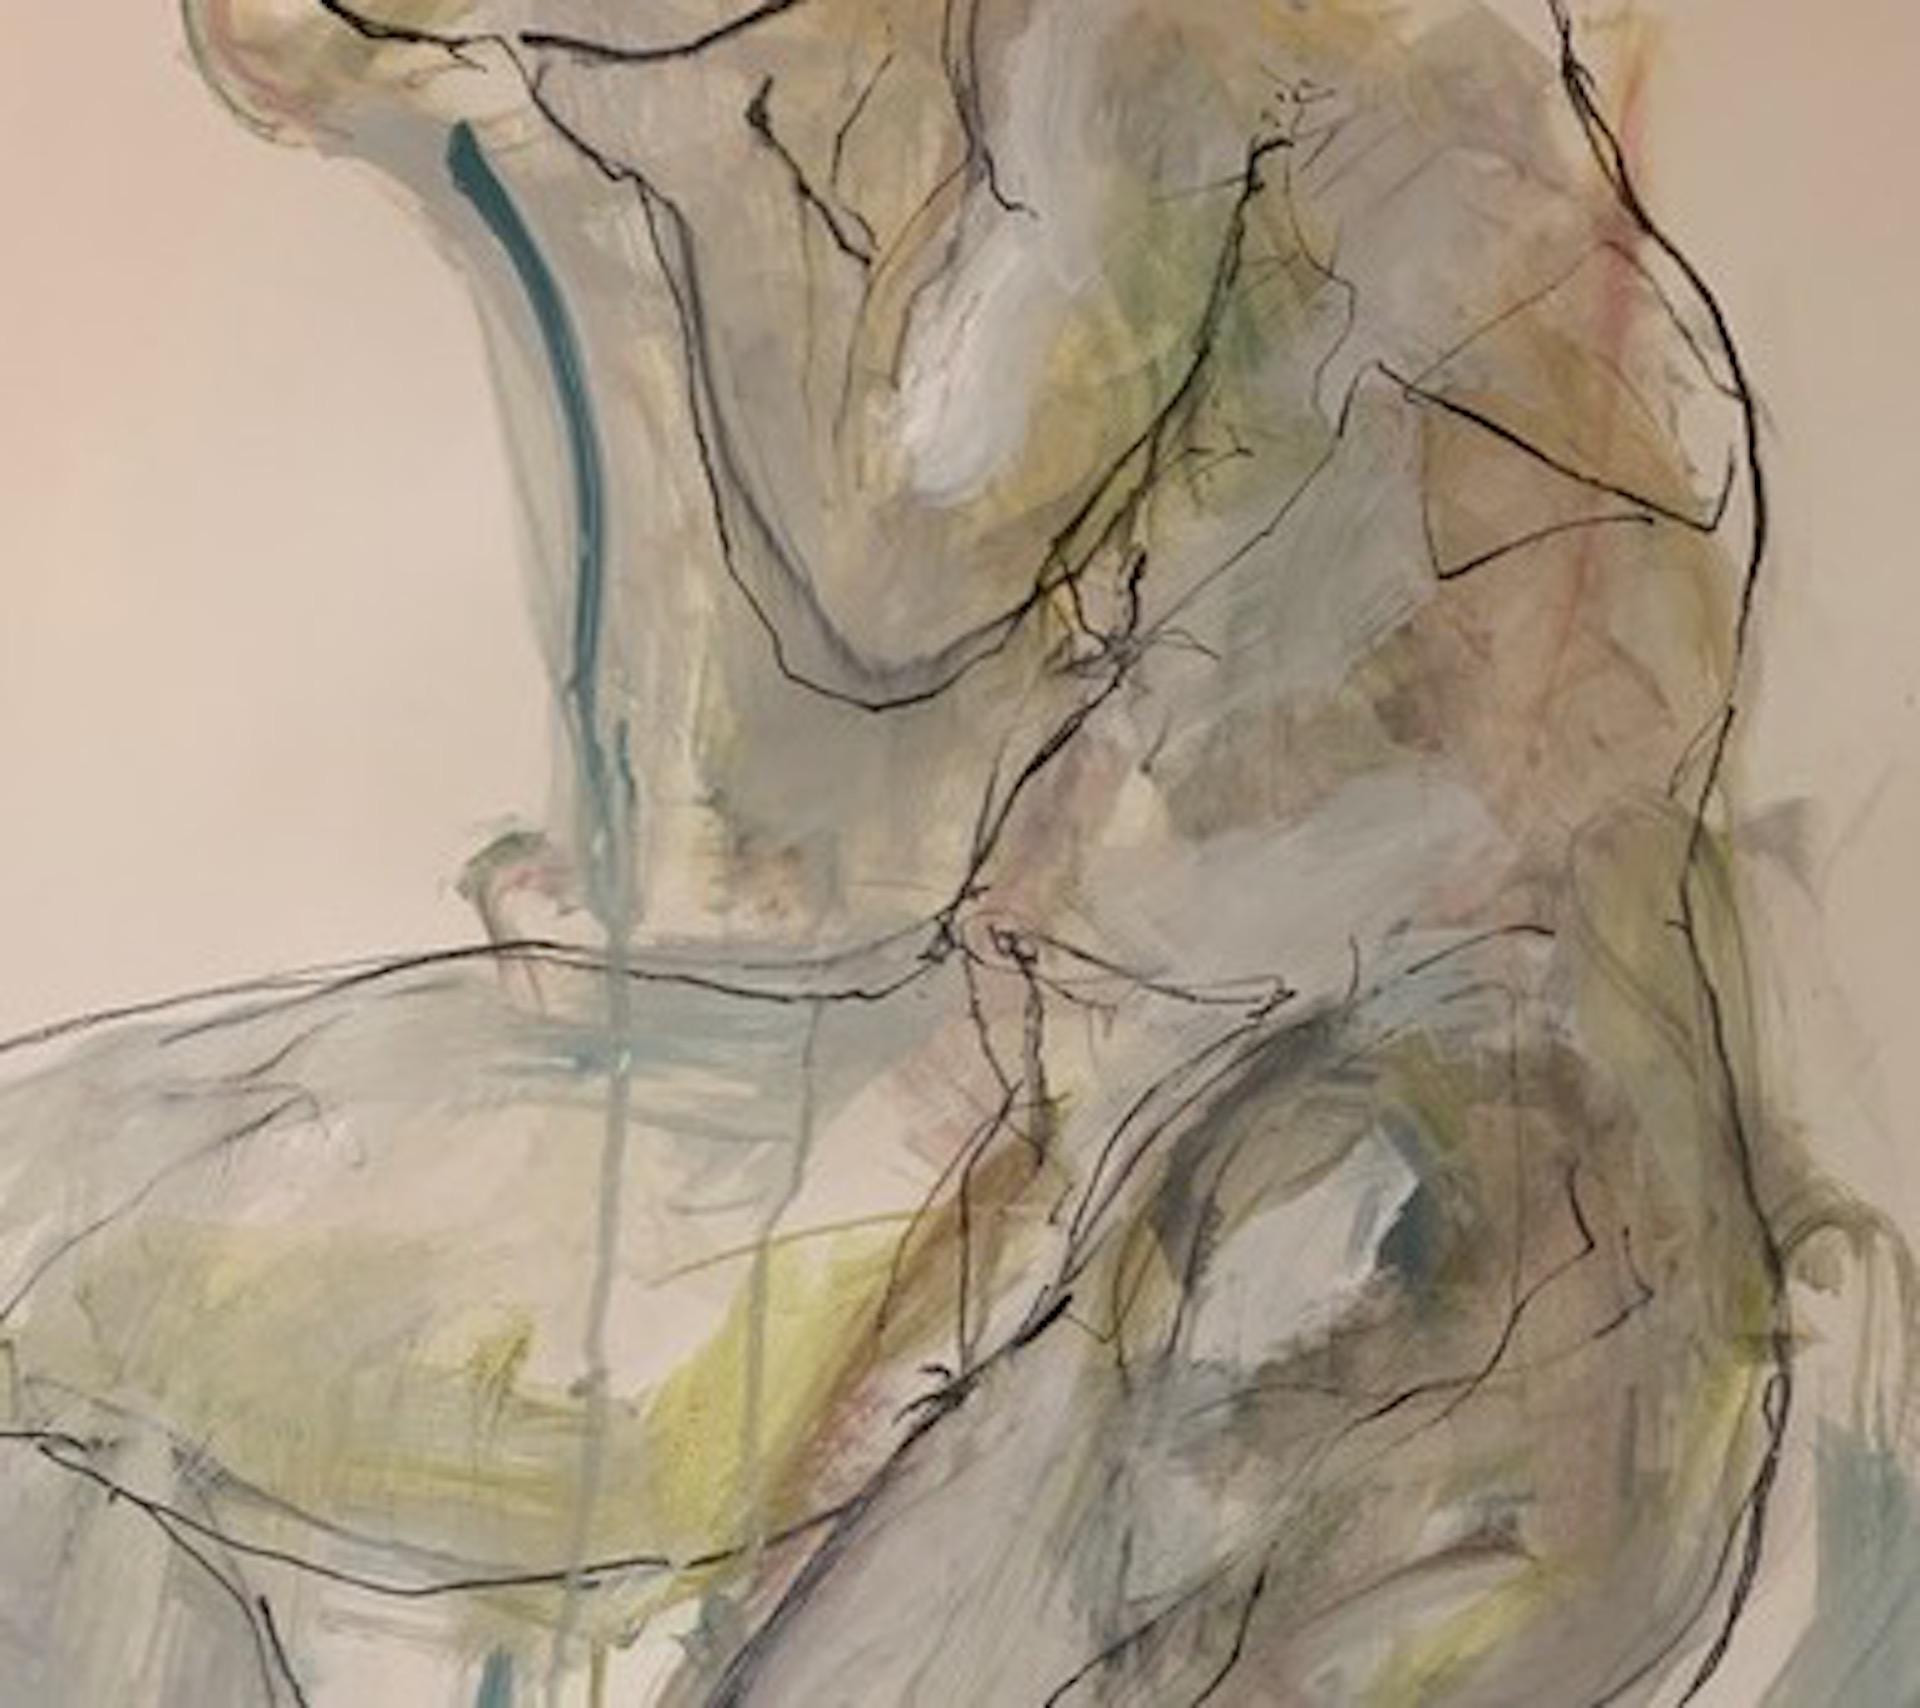 Judith Brenner
Rich Seated 2
Original Figurative Painting
Mixed Media on Paper
Size: H 84.1cm x W 59.4cm x D 0.1cm
Sold Unframed
Please note that insitu images are purely an indication of how a piece may look.

Rich Seated 2 is a contemporary nude